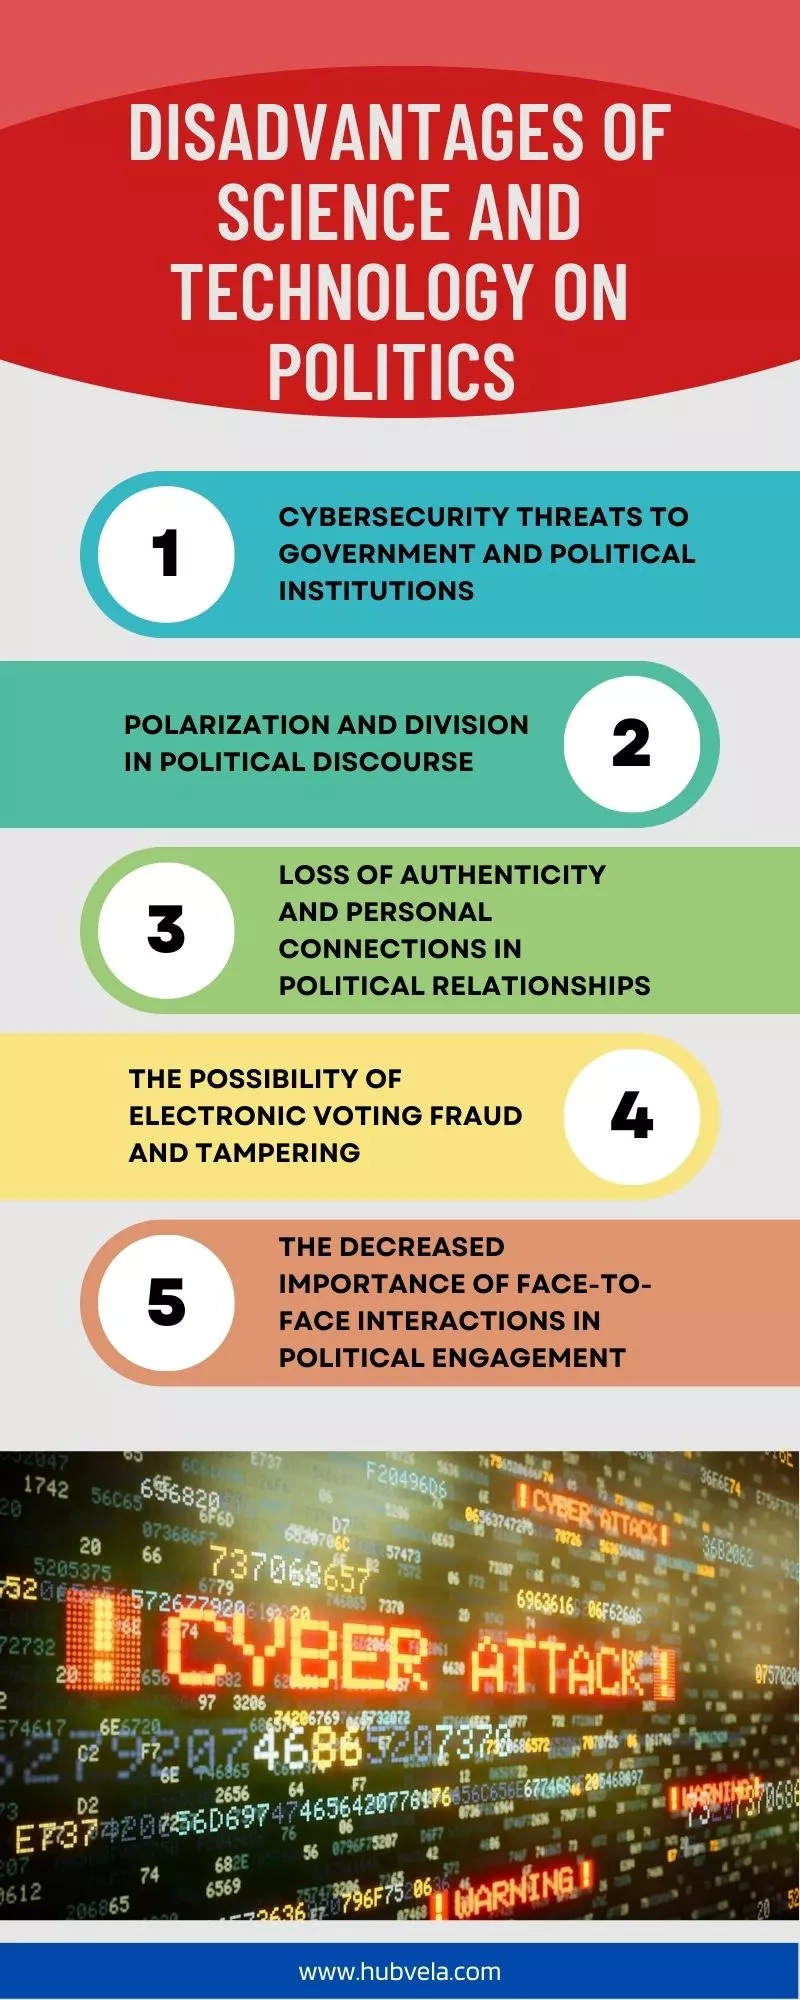 Disadvantages of Science and Technology in Politics Infographic